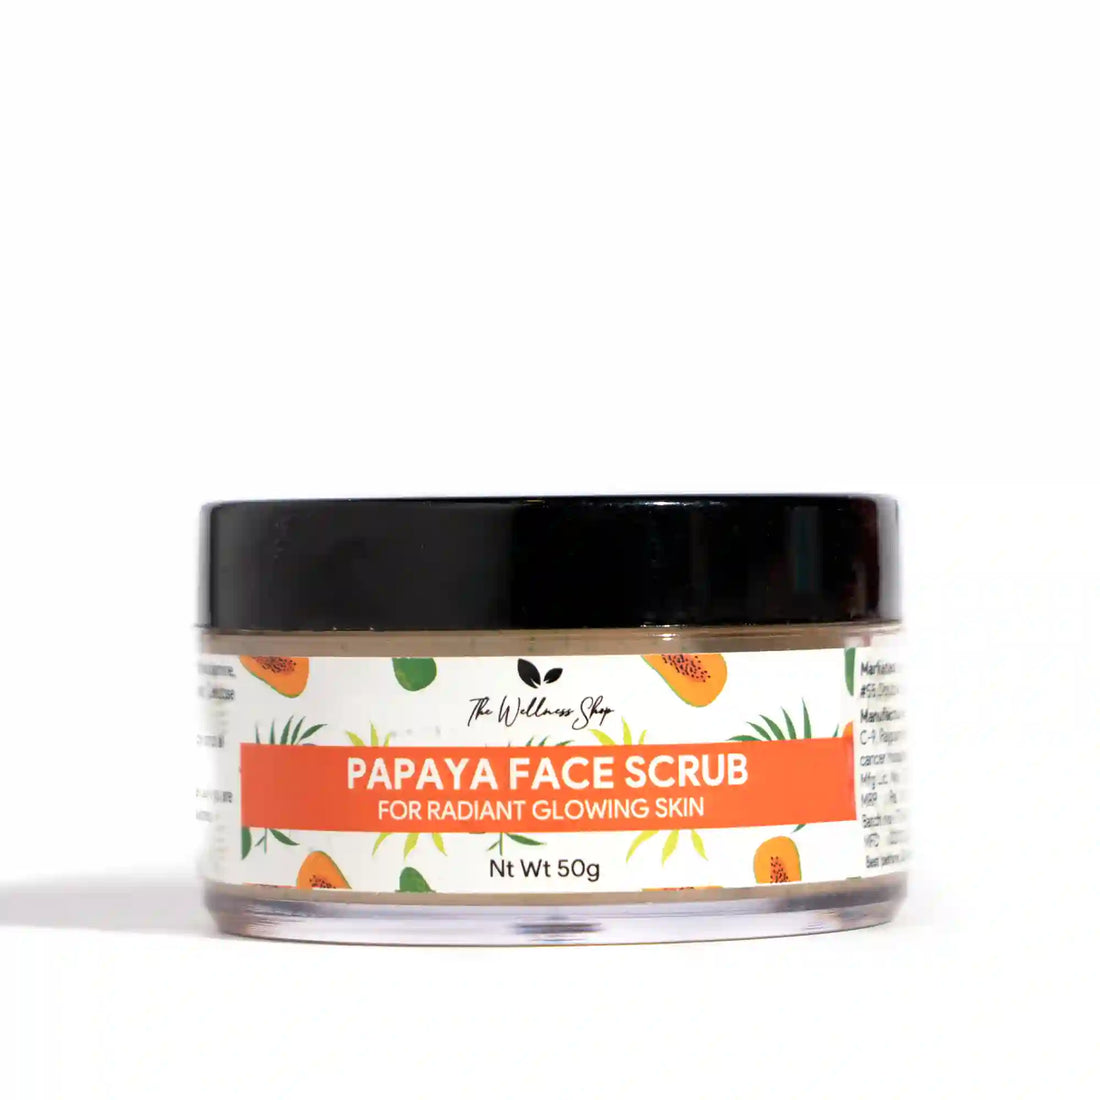 PAPAYA FACE SCRUB FOR RADIANT AND GLOWING SKIN